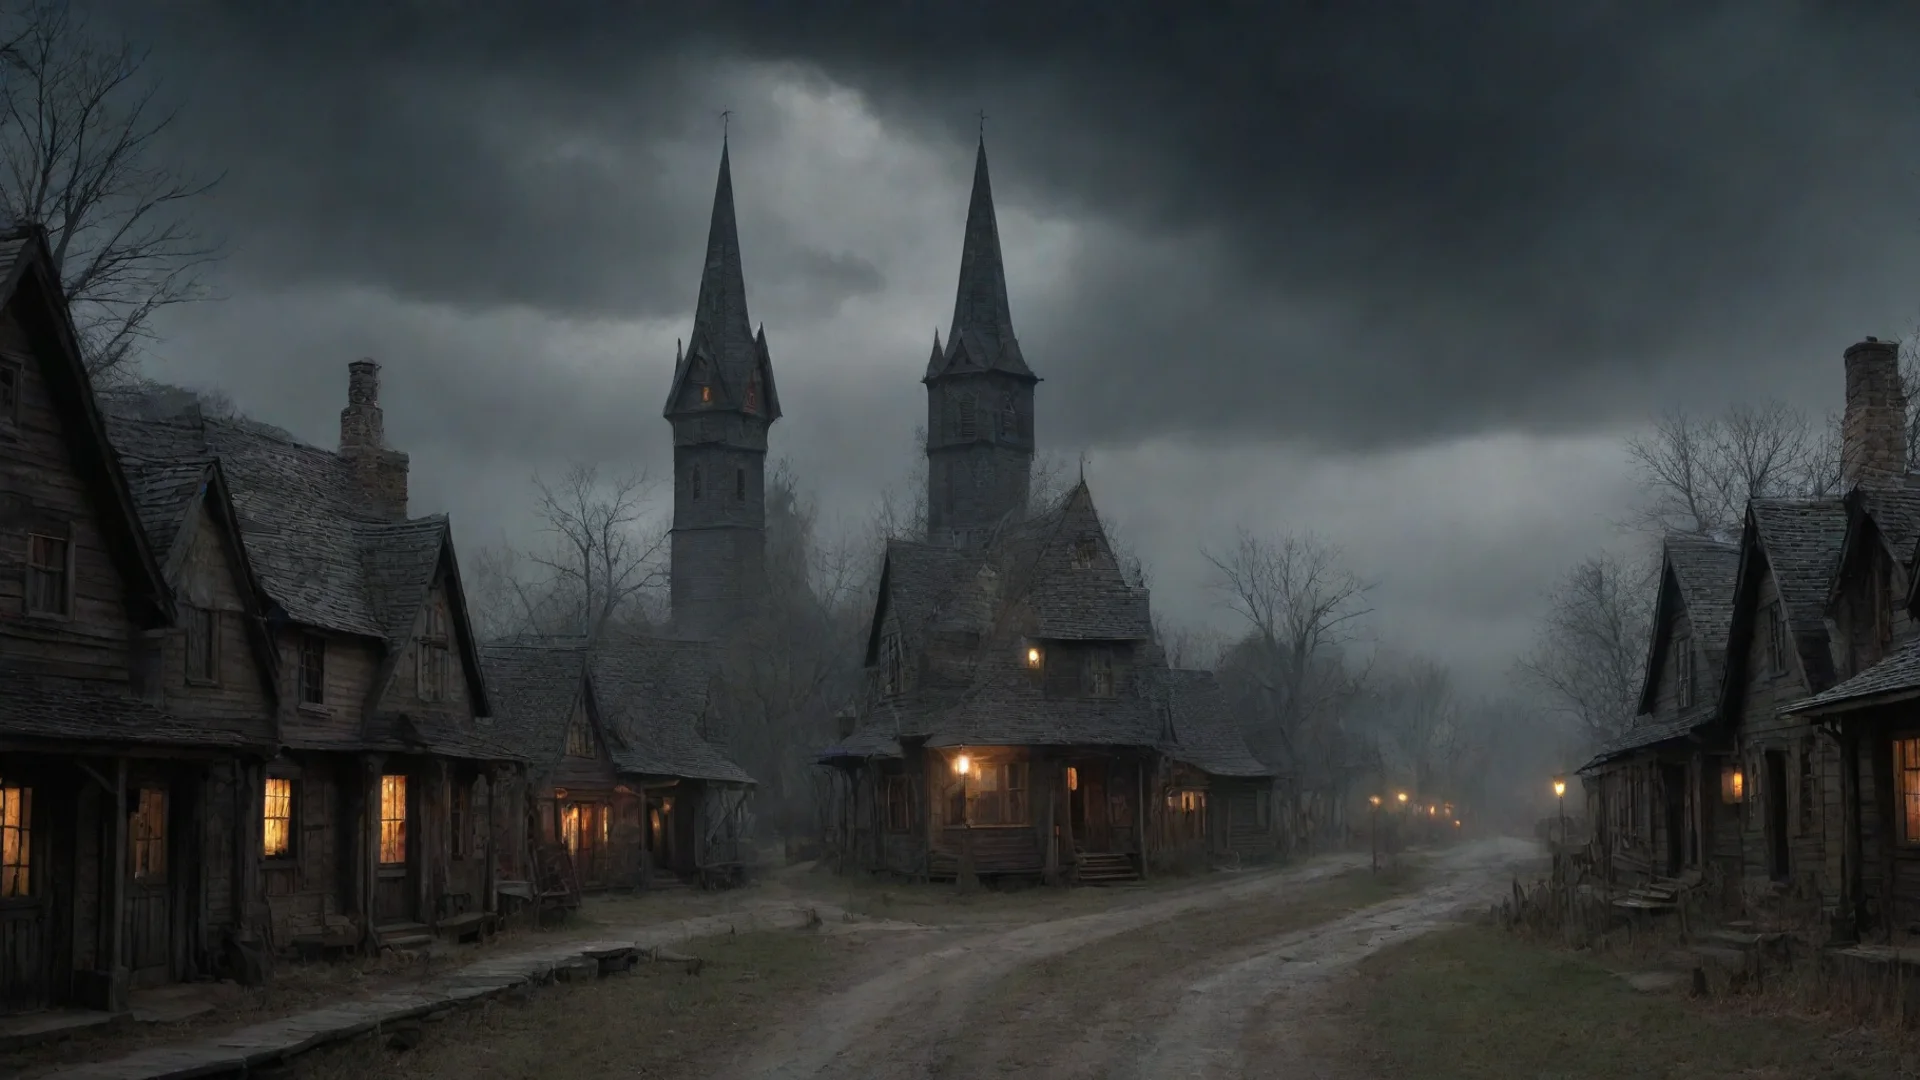 aiold spooky town 1800s vampire town steeple olden days windswept hd epic wide